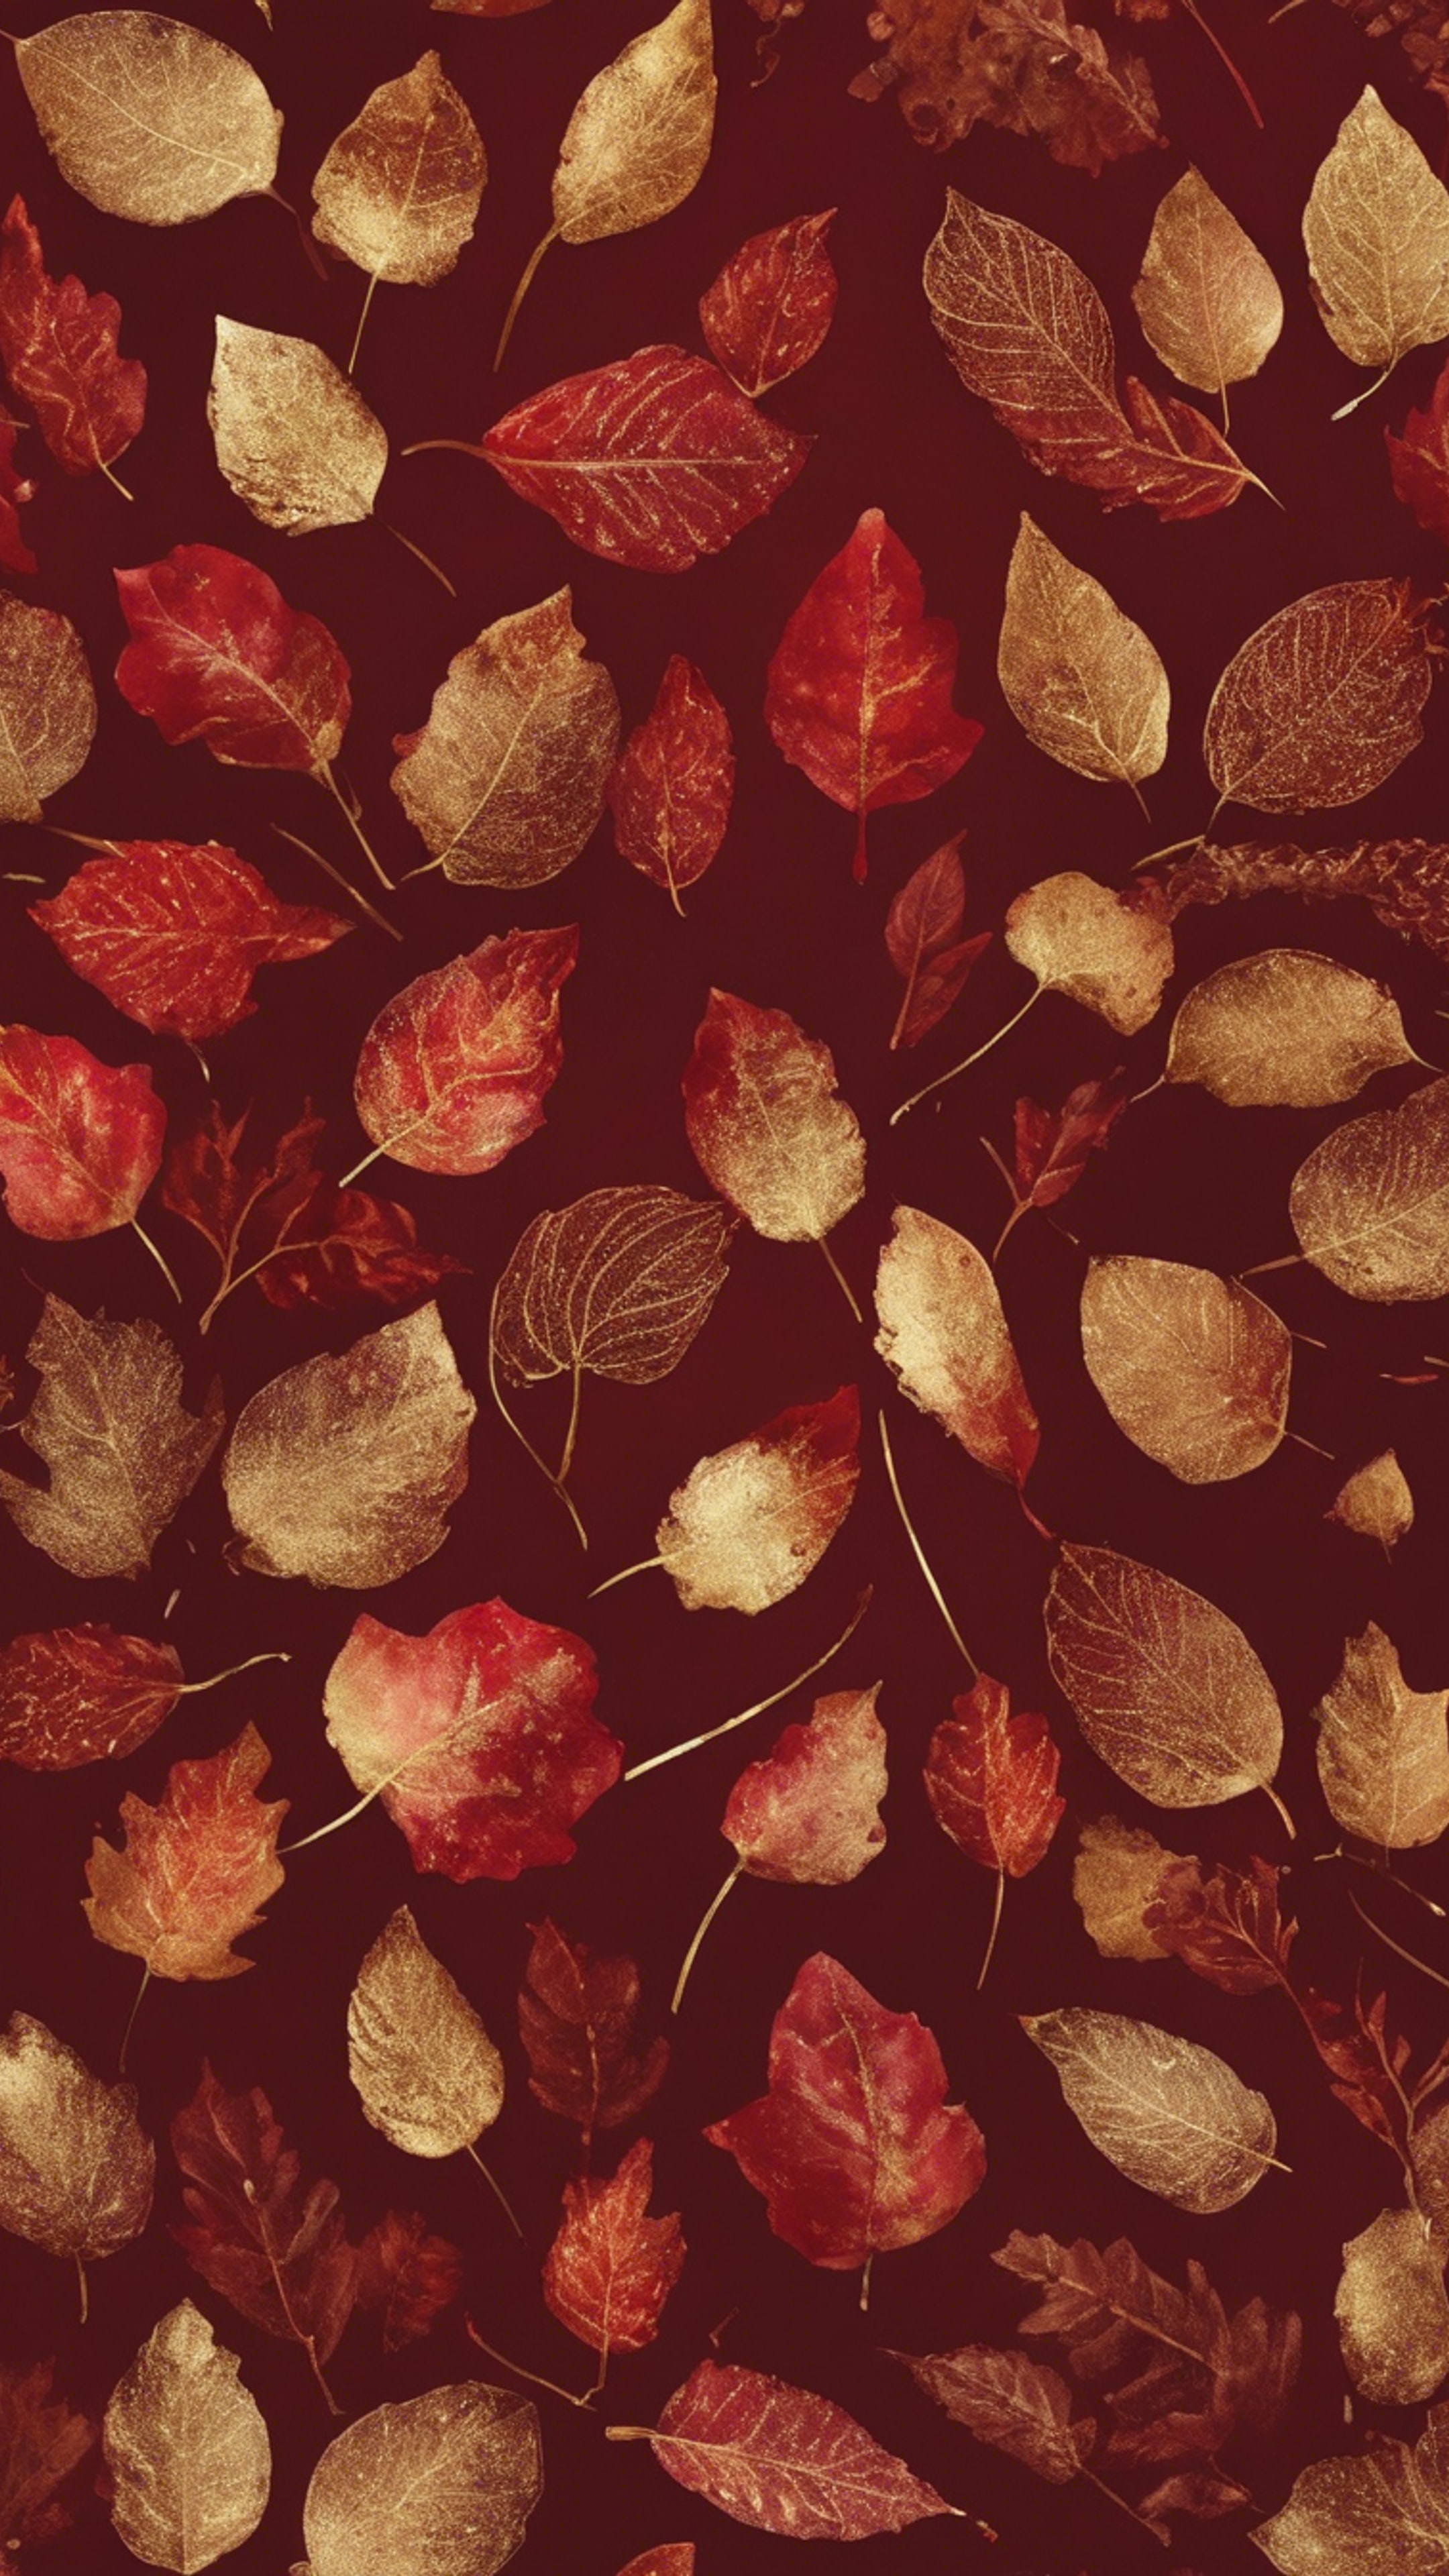 Exquisite patterns inspired by autumn leaves falling on lush red velvet with delicate gold accents.壁紙[ffa0c6ed7c5a4575a207]